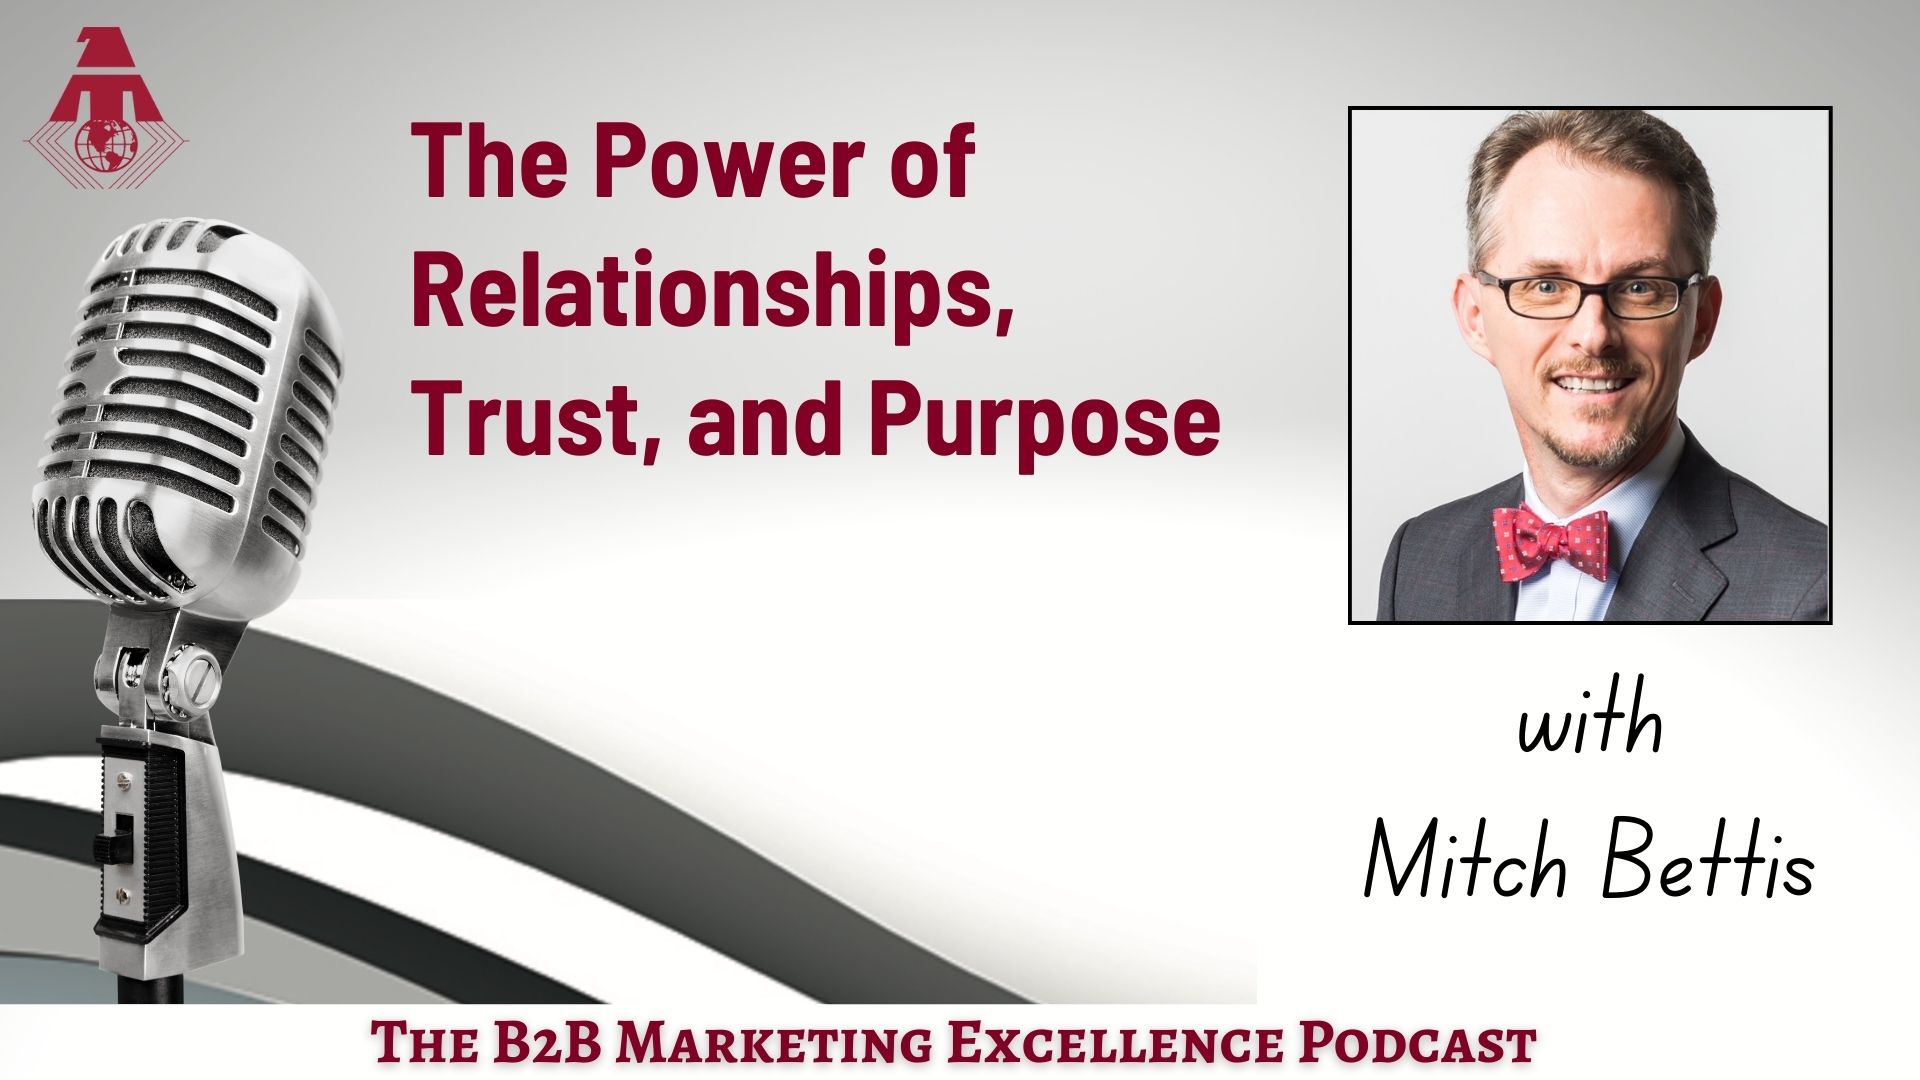 Podcast – The Power of Relationships, Trust, and Purpose